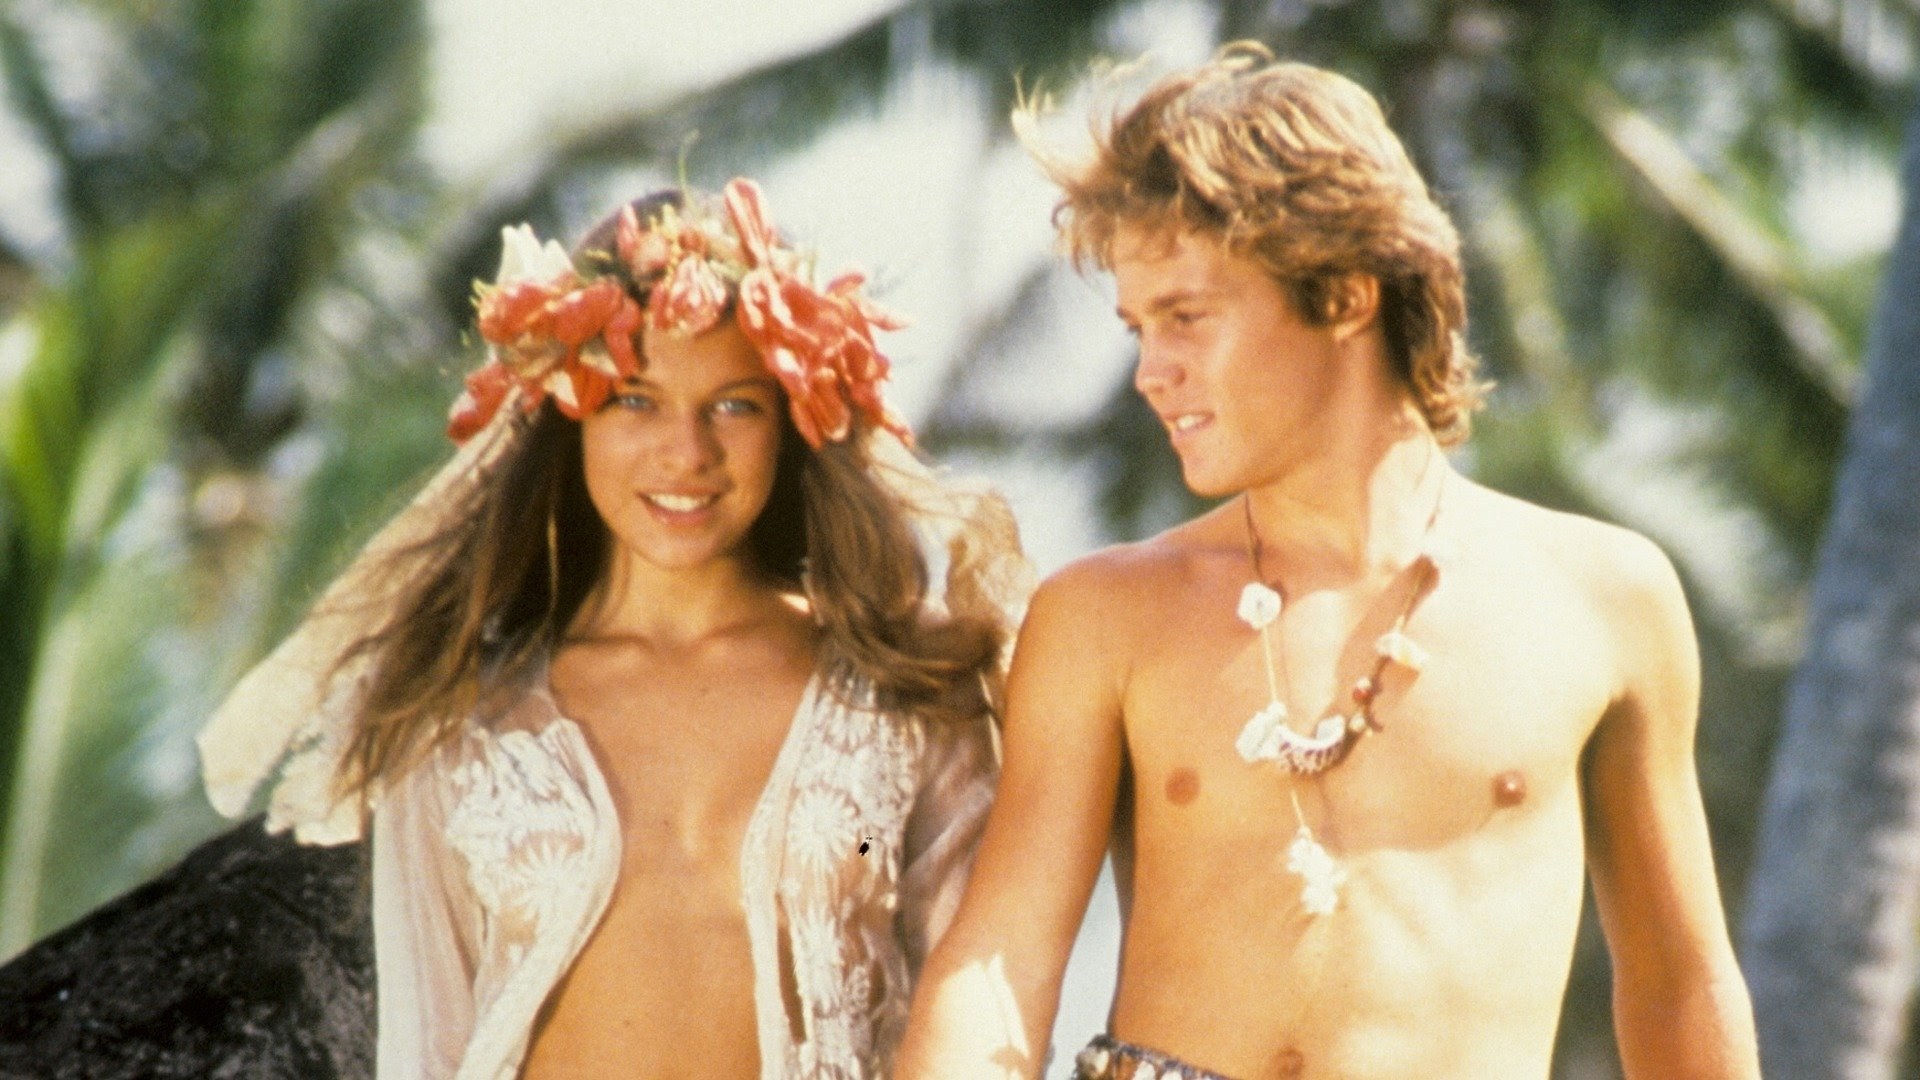 Return To The Blue Lagoon - Movies On Google Play